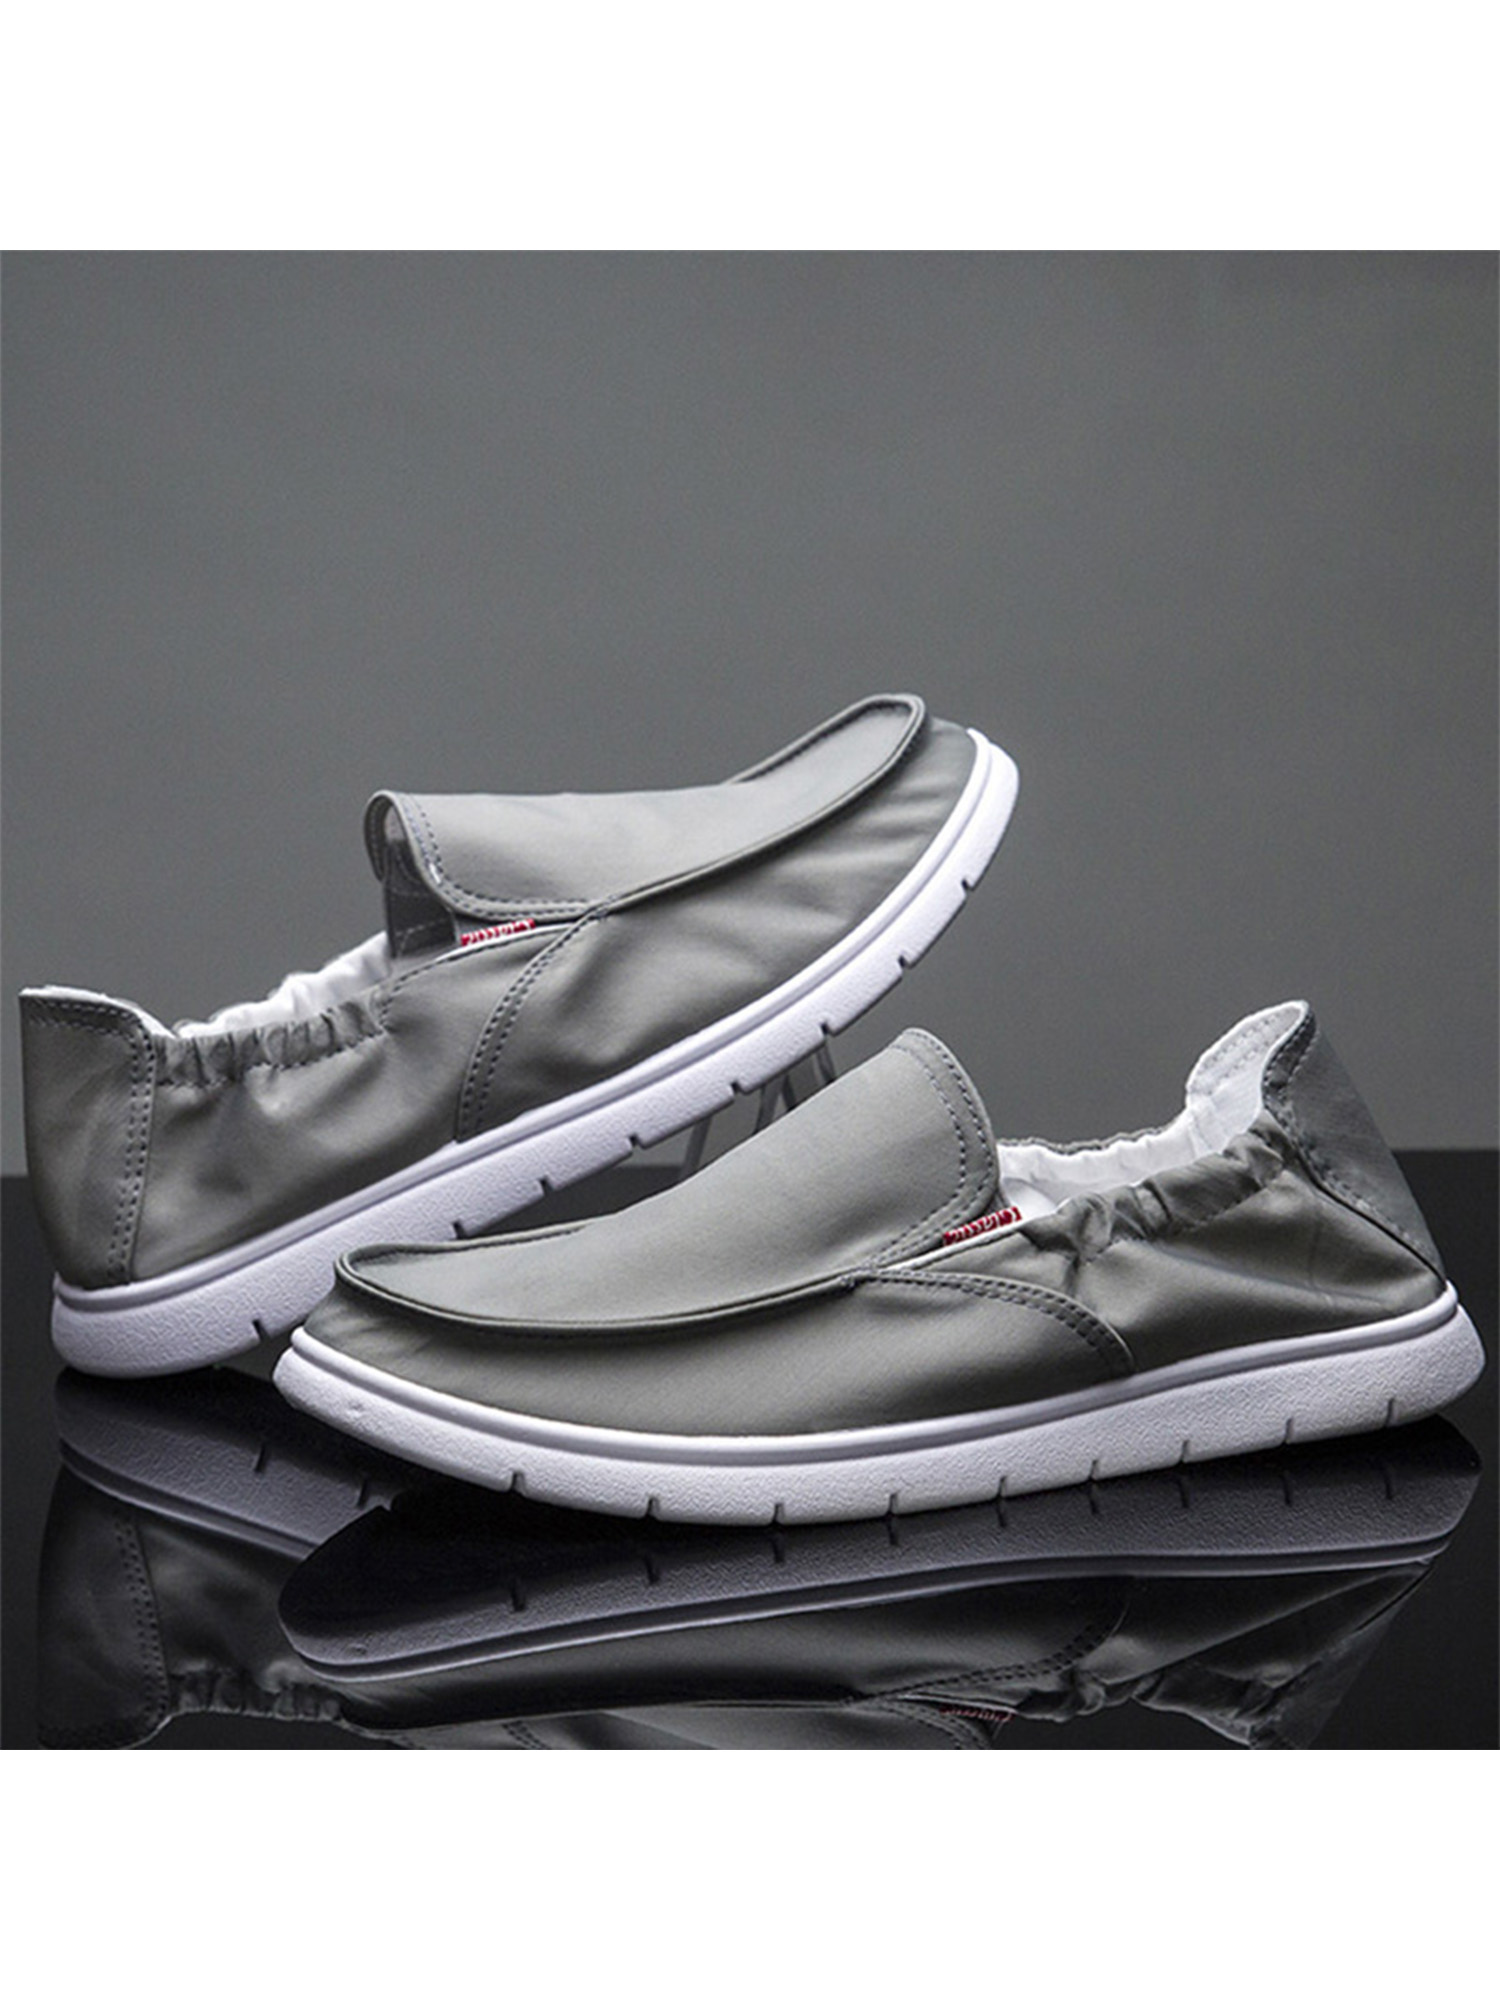 LUXUR Casual Canvas Shoes for Men Slip On Loafers Deck Shoes Comfortable Boat Shoes Outdoor Fashion - image 3 of 5